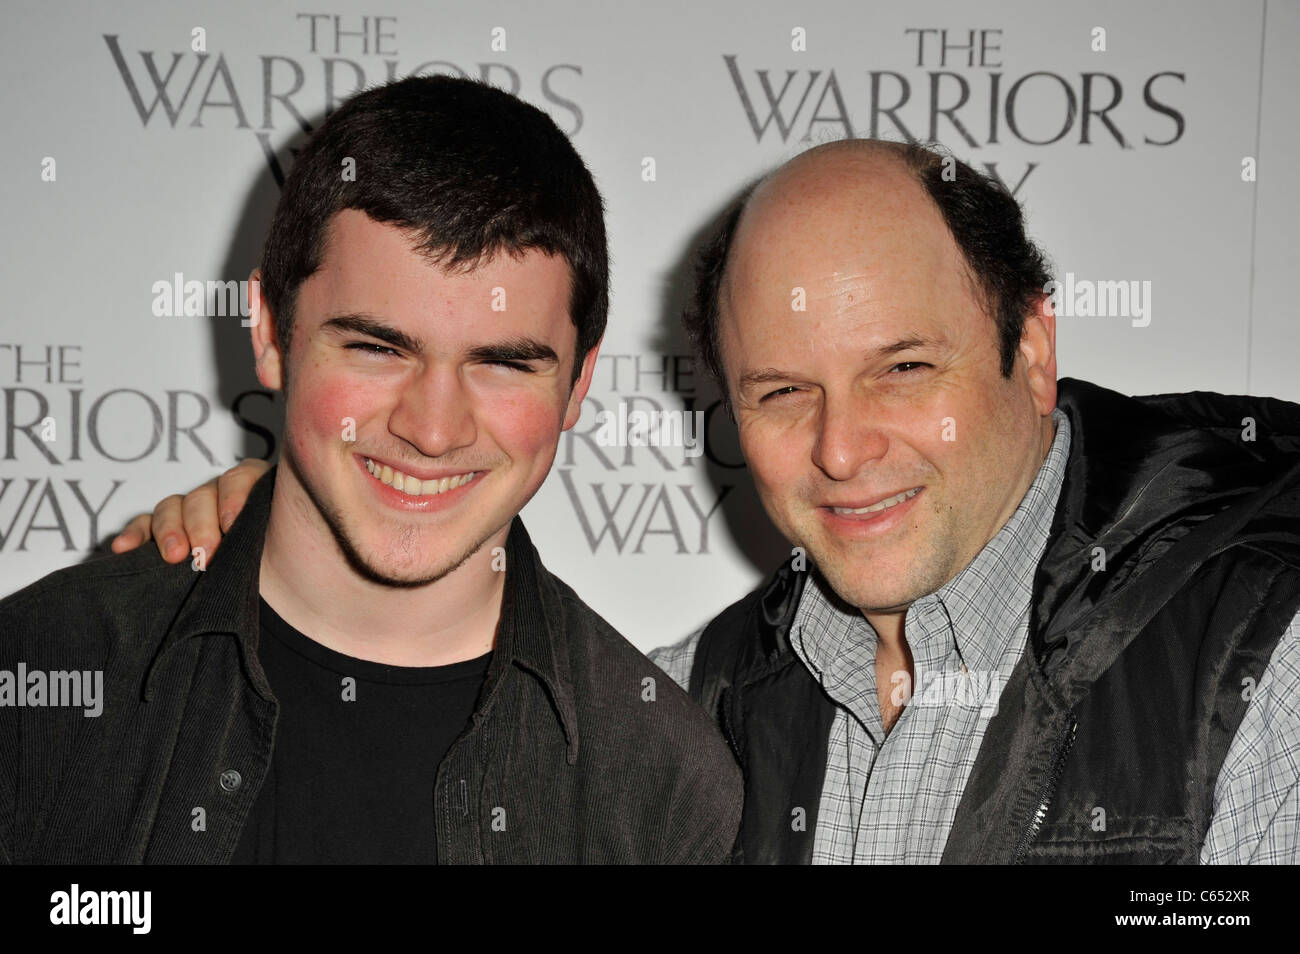 Jason Alexander at arrivals for THE WARRIOR'S WAY Premiere, CGV Cinemas, Los Angeles, CA November 19, 2010. Photo By: Robert Kenney/Everett Collection Stock Photo